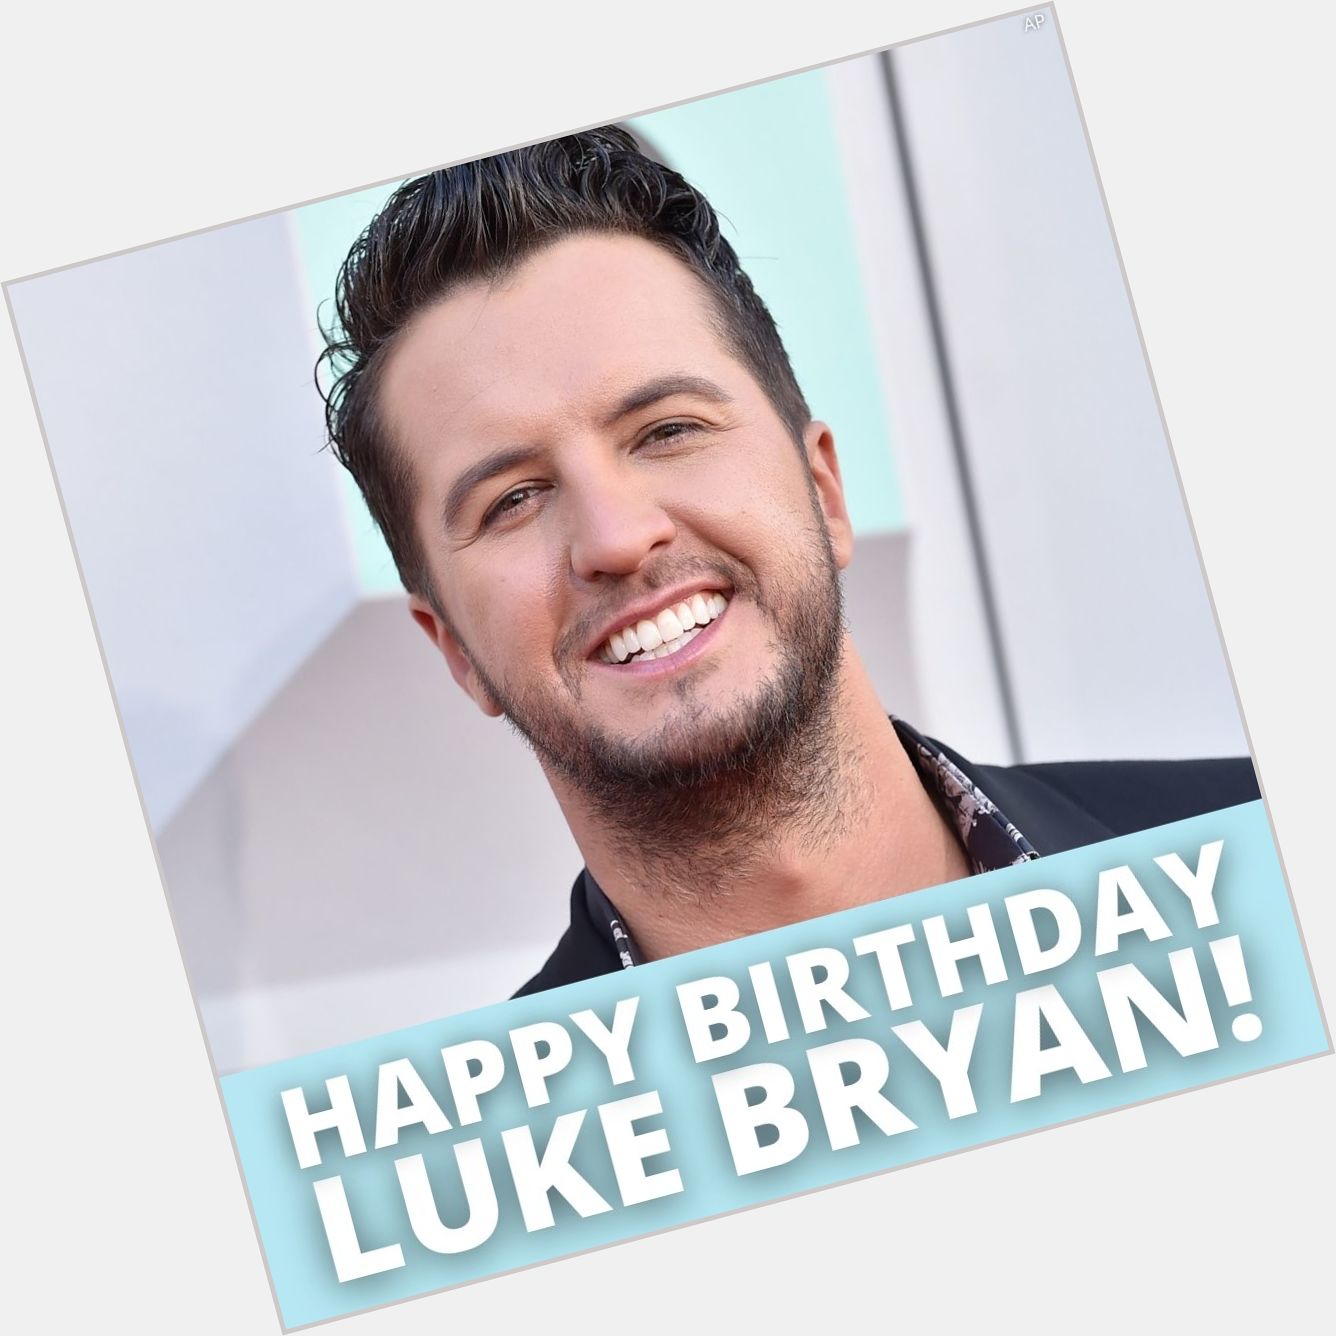 HAPPY BIRTHDAY! What\s your favorite Luke Bryan song?

Looking for local concerts?  